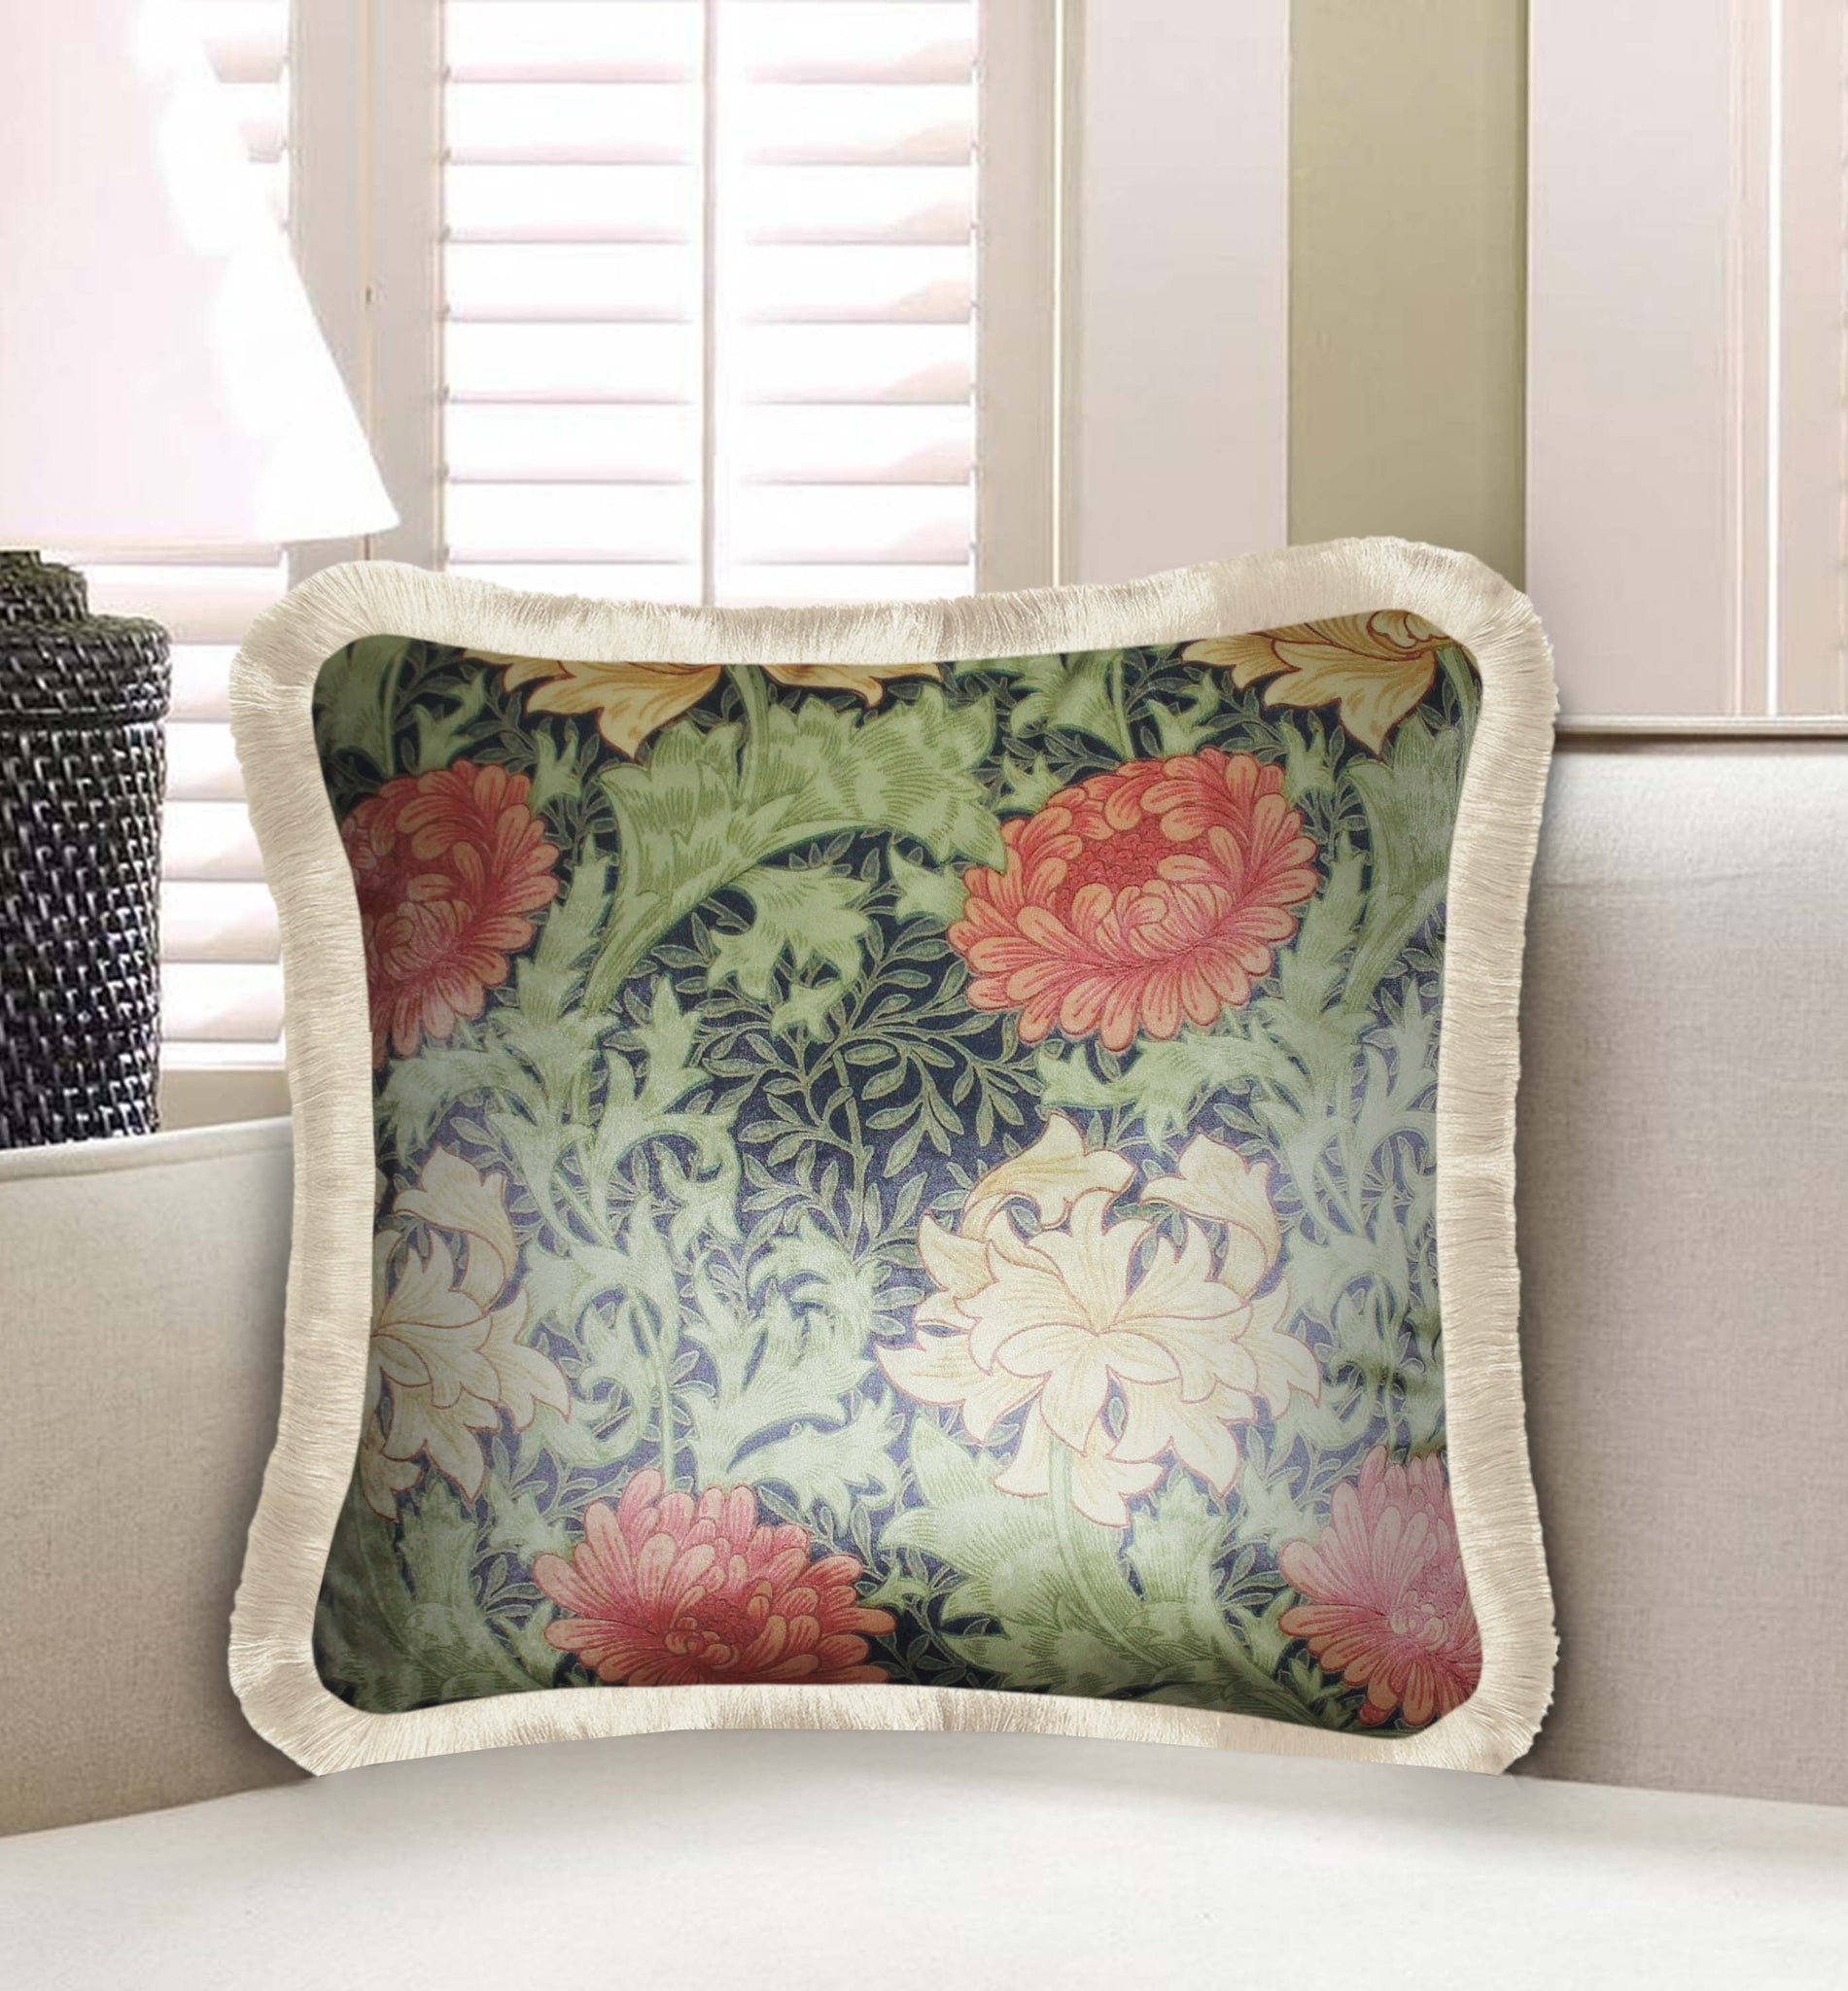 Beige Velvet Cushion Cover William Morris Floral Decorative Pillowcase Vintage Home Décor Throw Pillow for Sofa Chair Couch Bedroom 45x45 cm 18x18 In